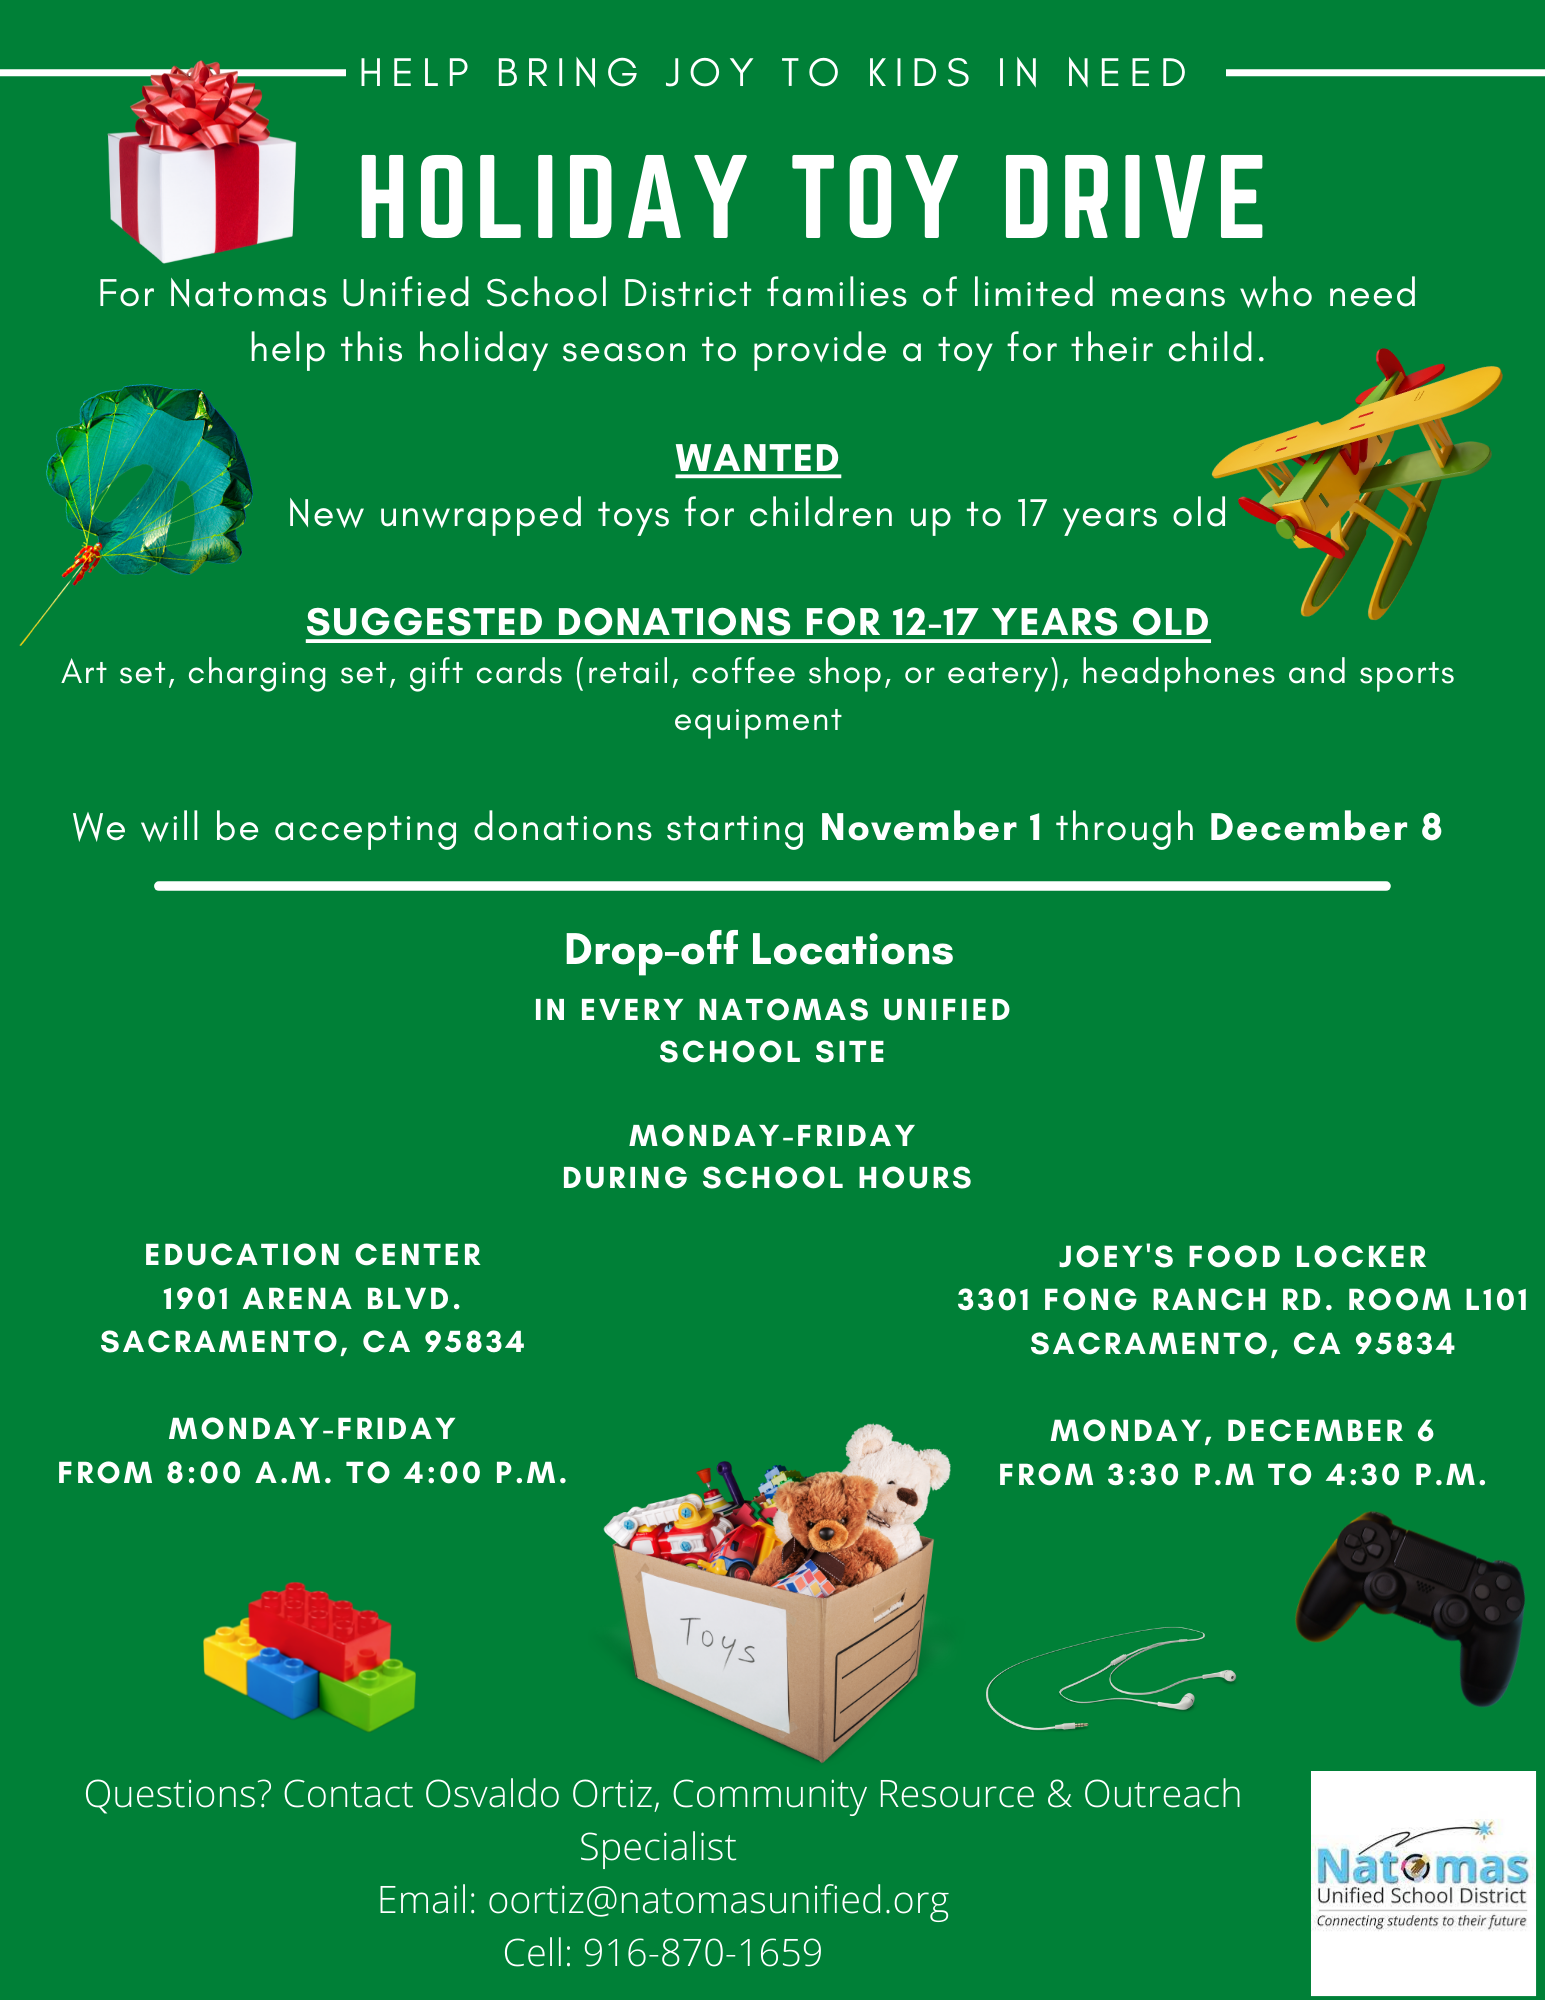 2021 NUSD Holiday Toy Drive flyer in English